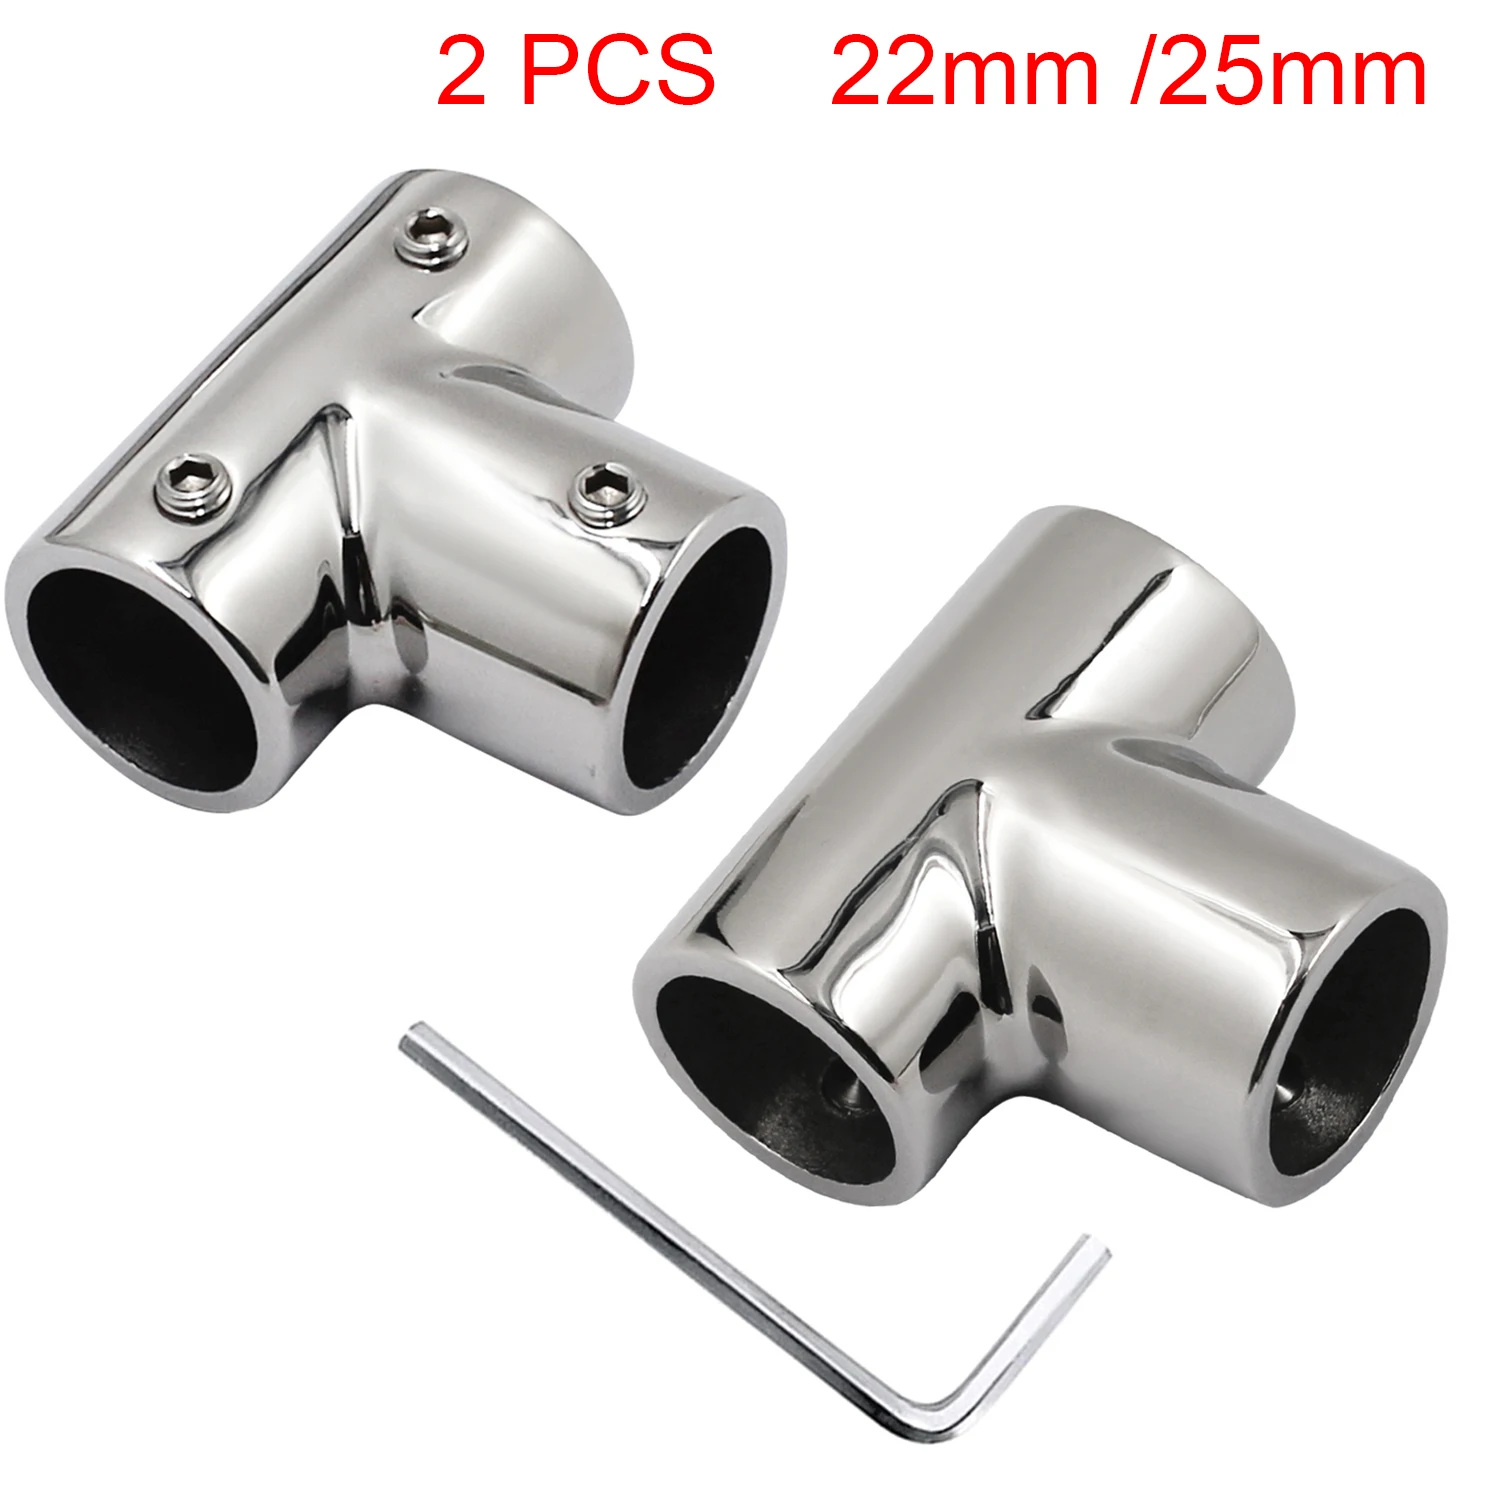 2 Pcs Stainless Steel 316 Marine Boat 3 Way Handrail Fitting 90° Deck Hand Rail Tee Joint Connector for 22mm/25mm Tube/Pipe kf50 nw50 kf40 nw40 reducer cross adapter stainless steel 304 cross 4 way connector vacuum flanges pipe tube fitting joint